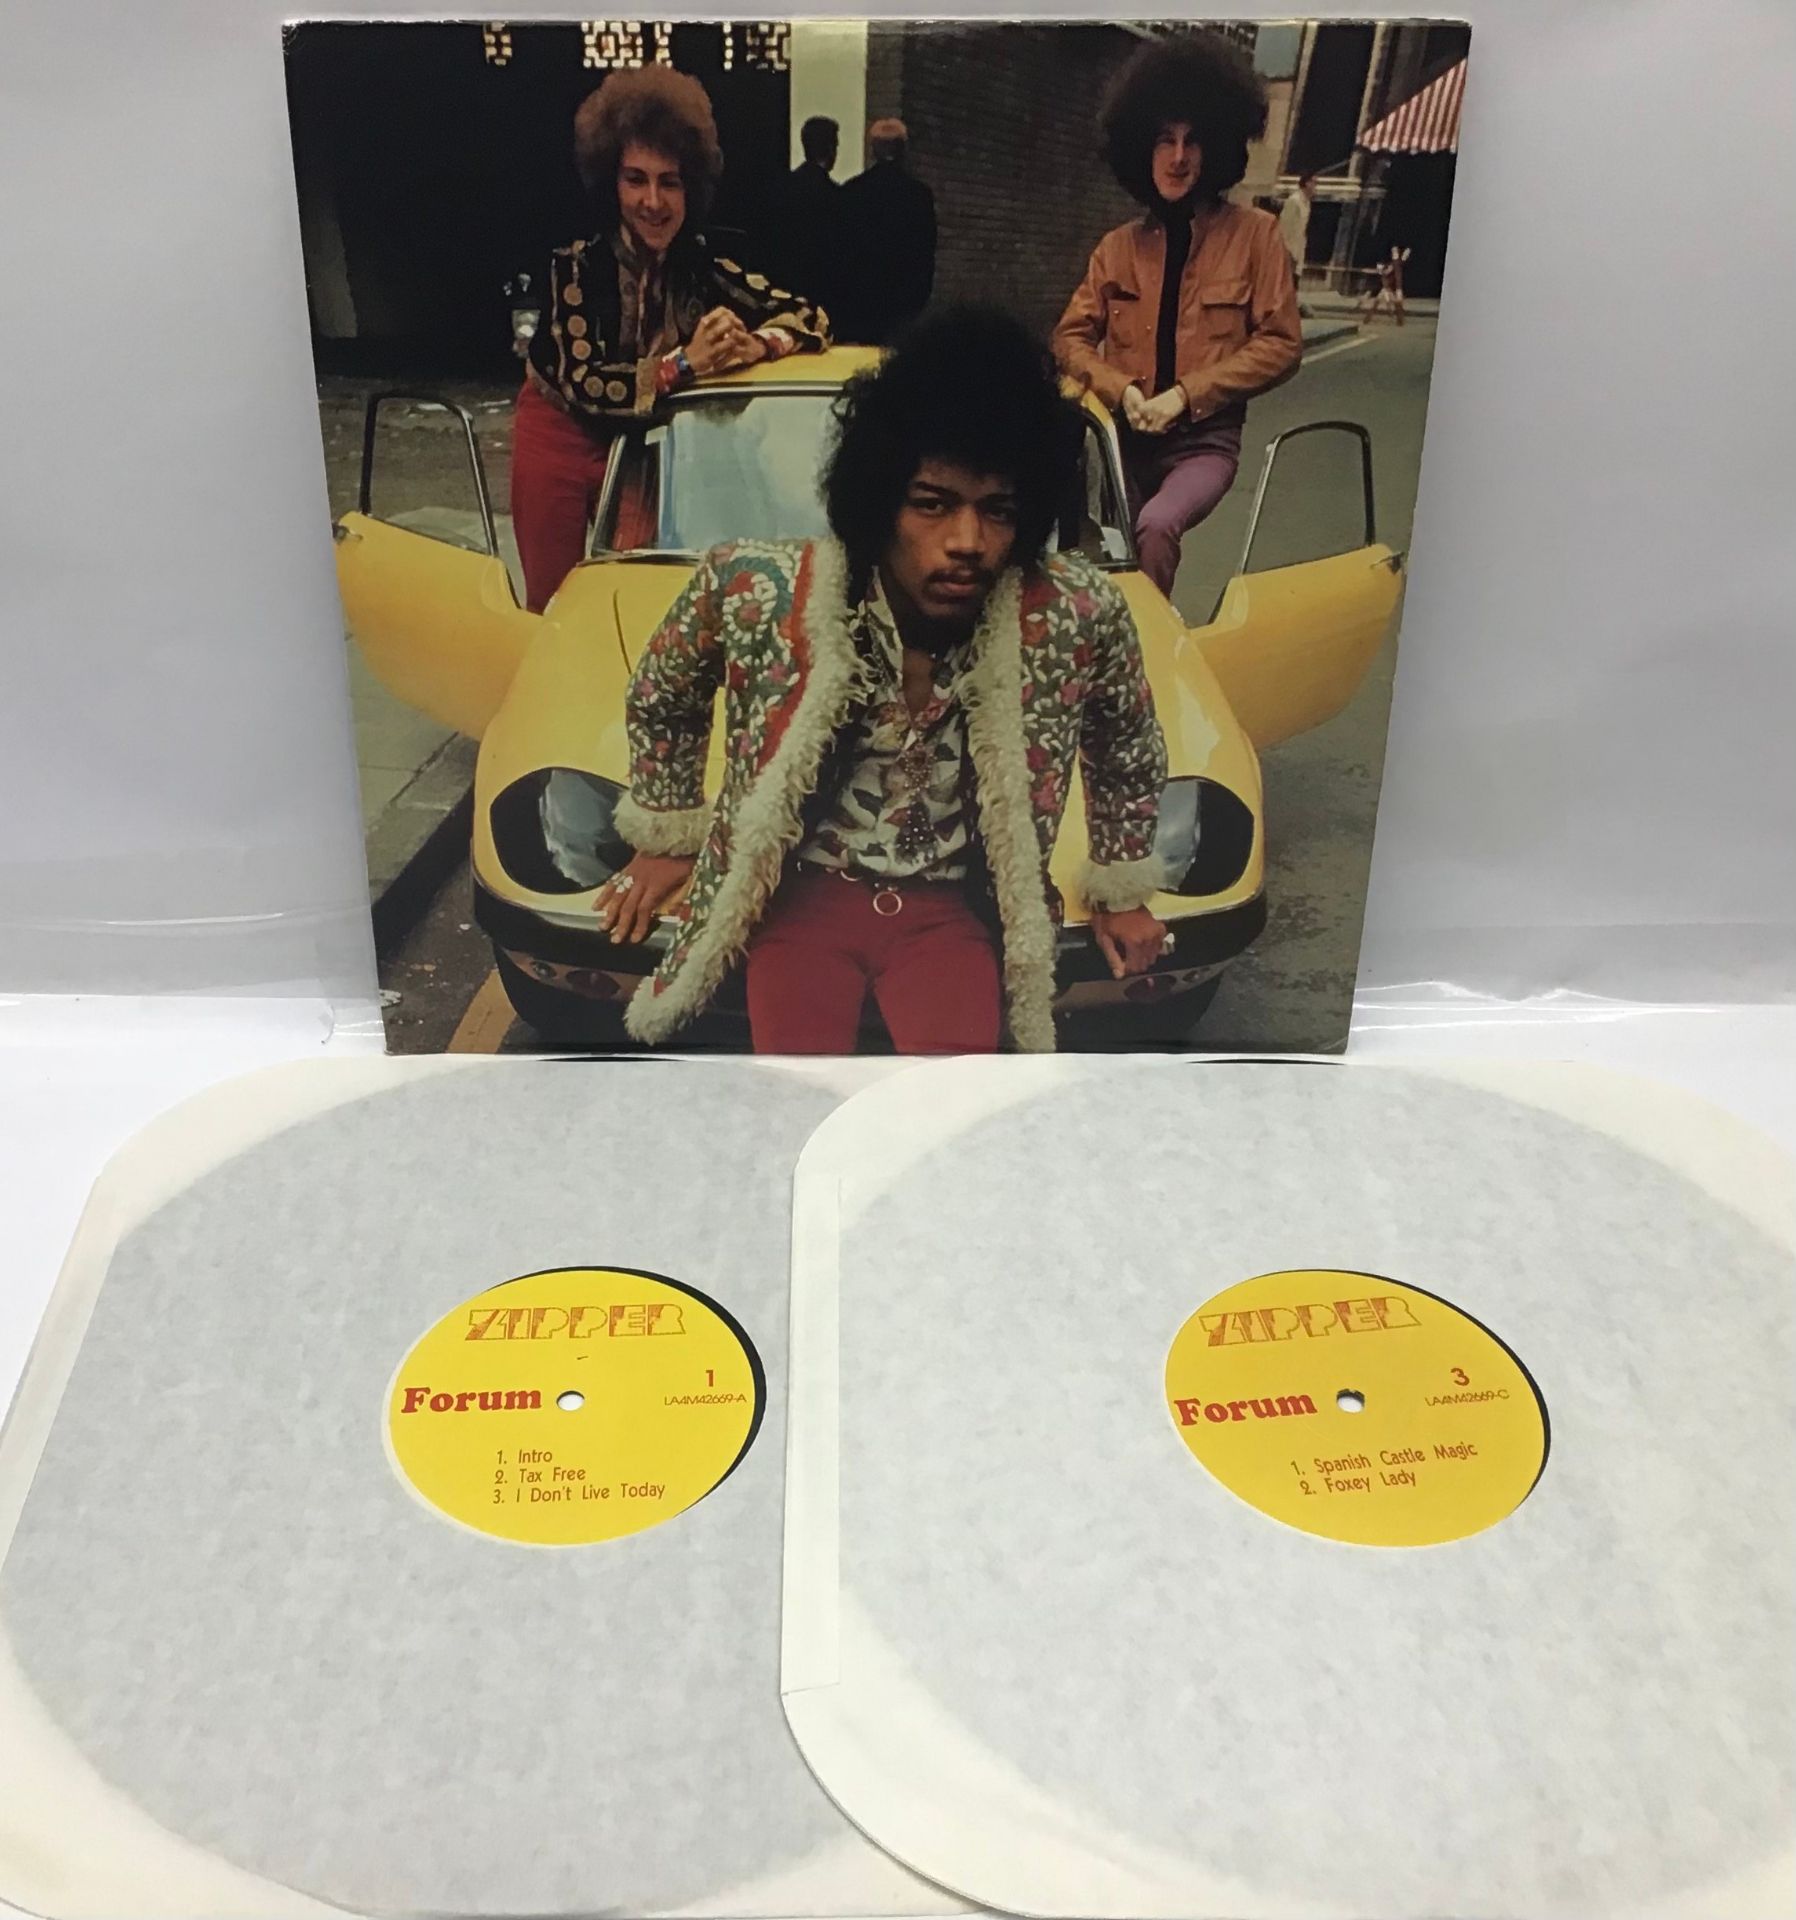 JIMI HENDRIX EXPERIENCE ‘LIVE AT THE L.A.FORUM’ VINYL ALBUM. Both records sound perfect and the